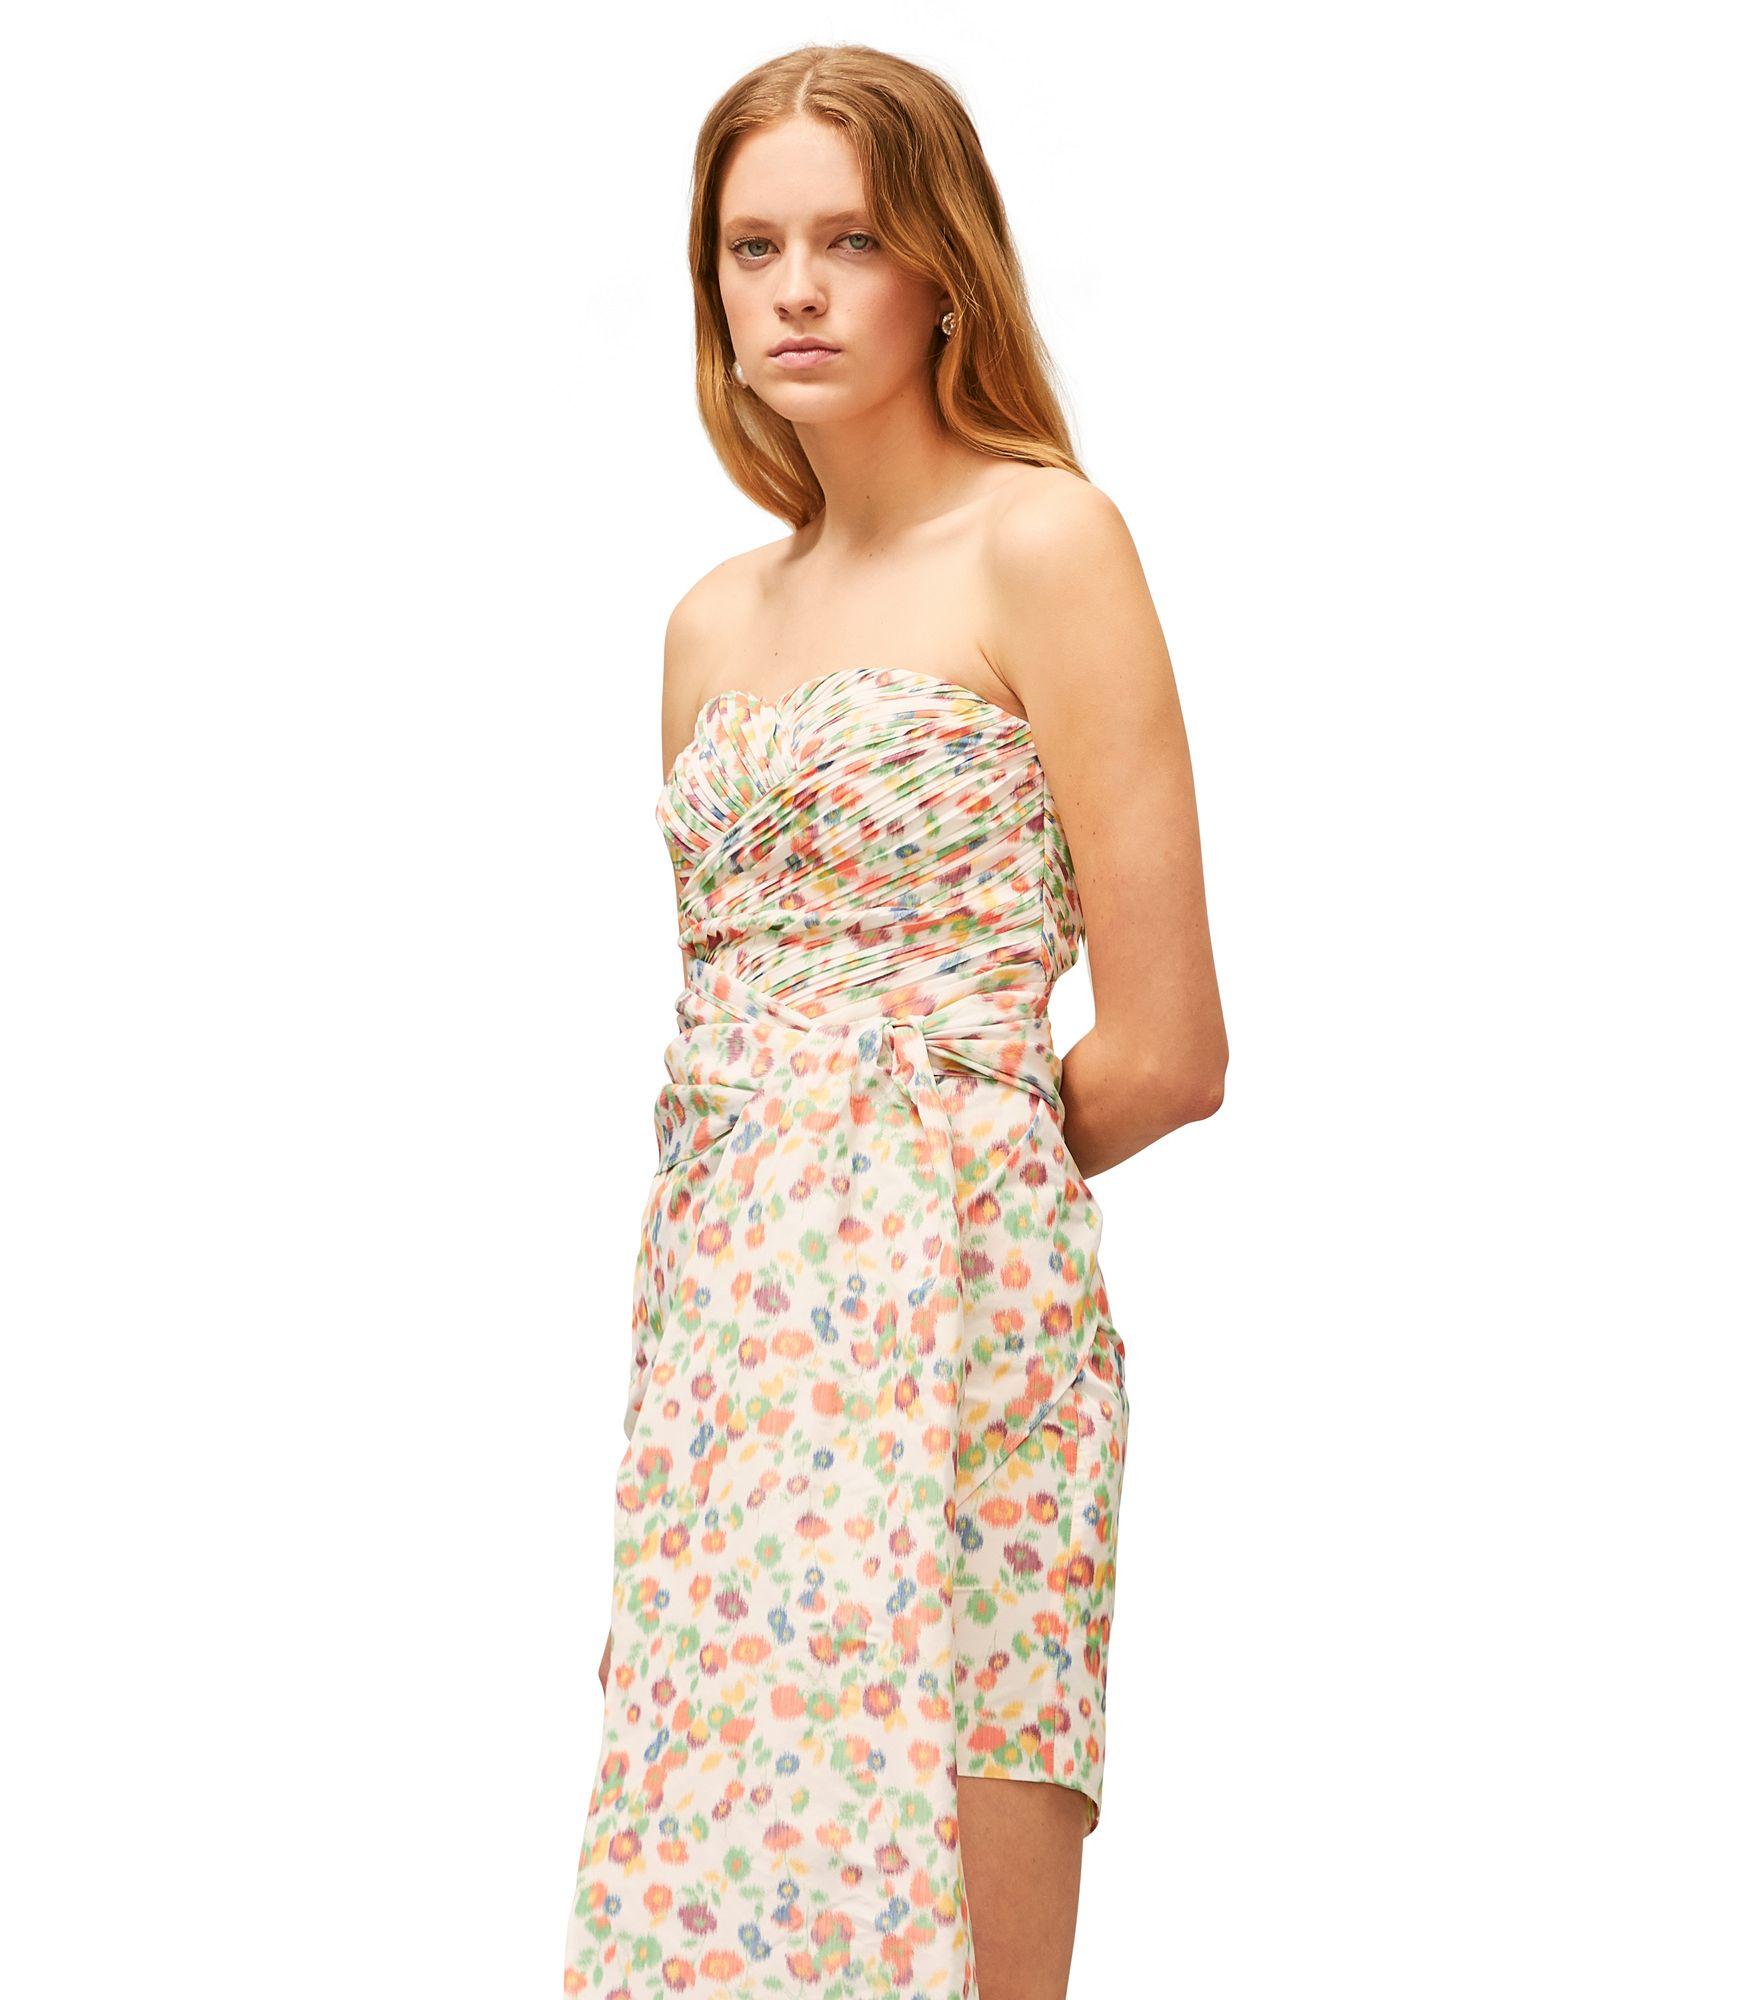 Tory Burch Synthetic Strapless Printed Taffeta Draped Party Dress 